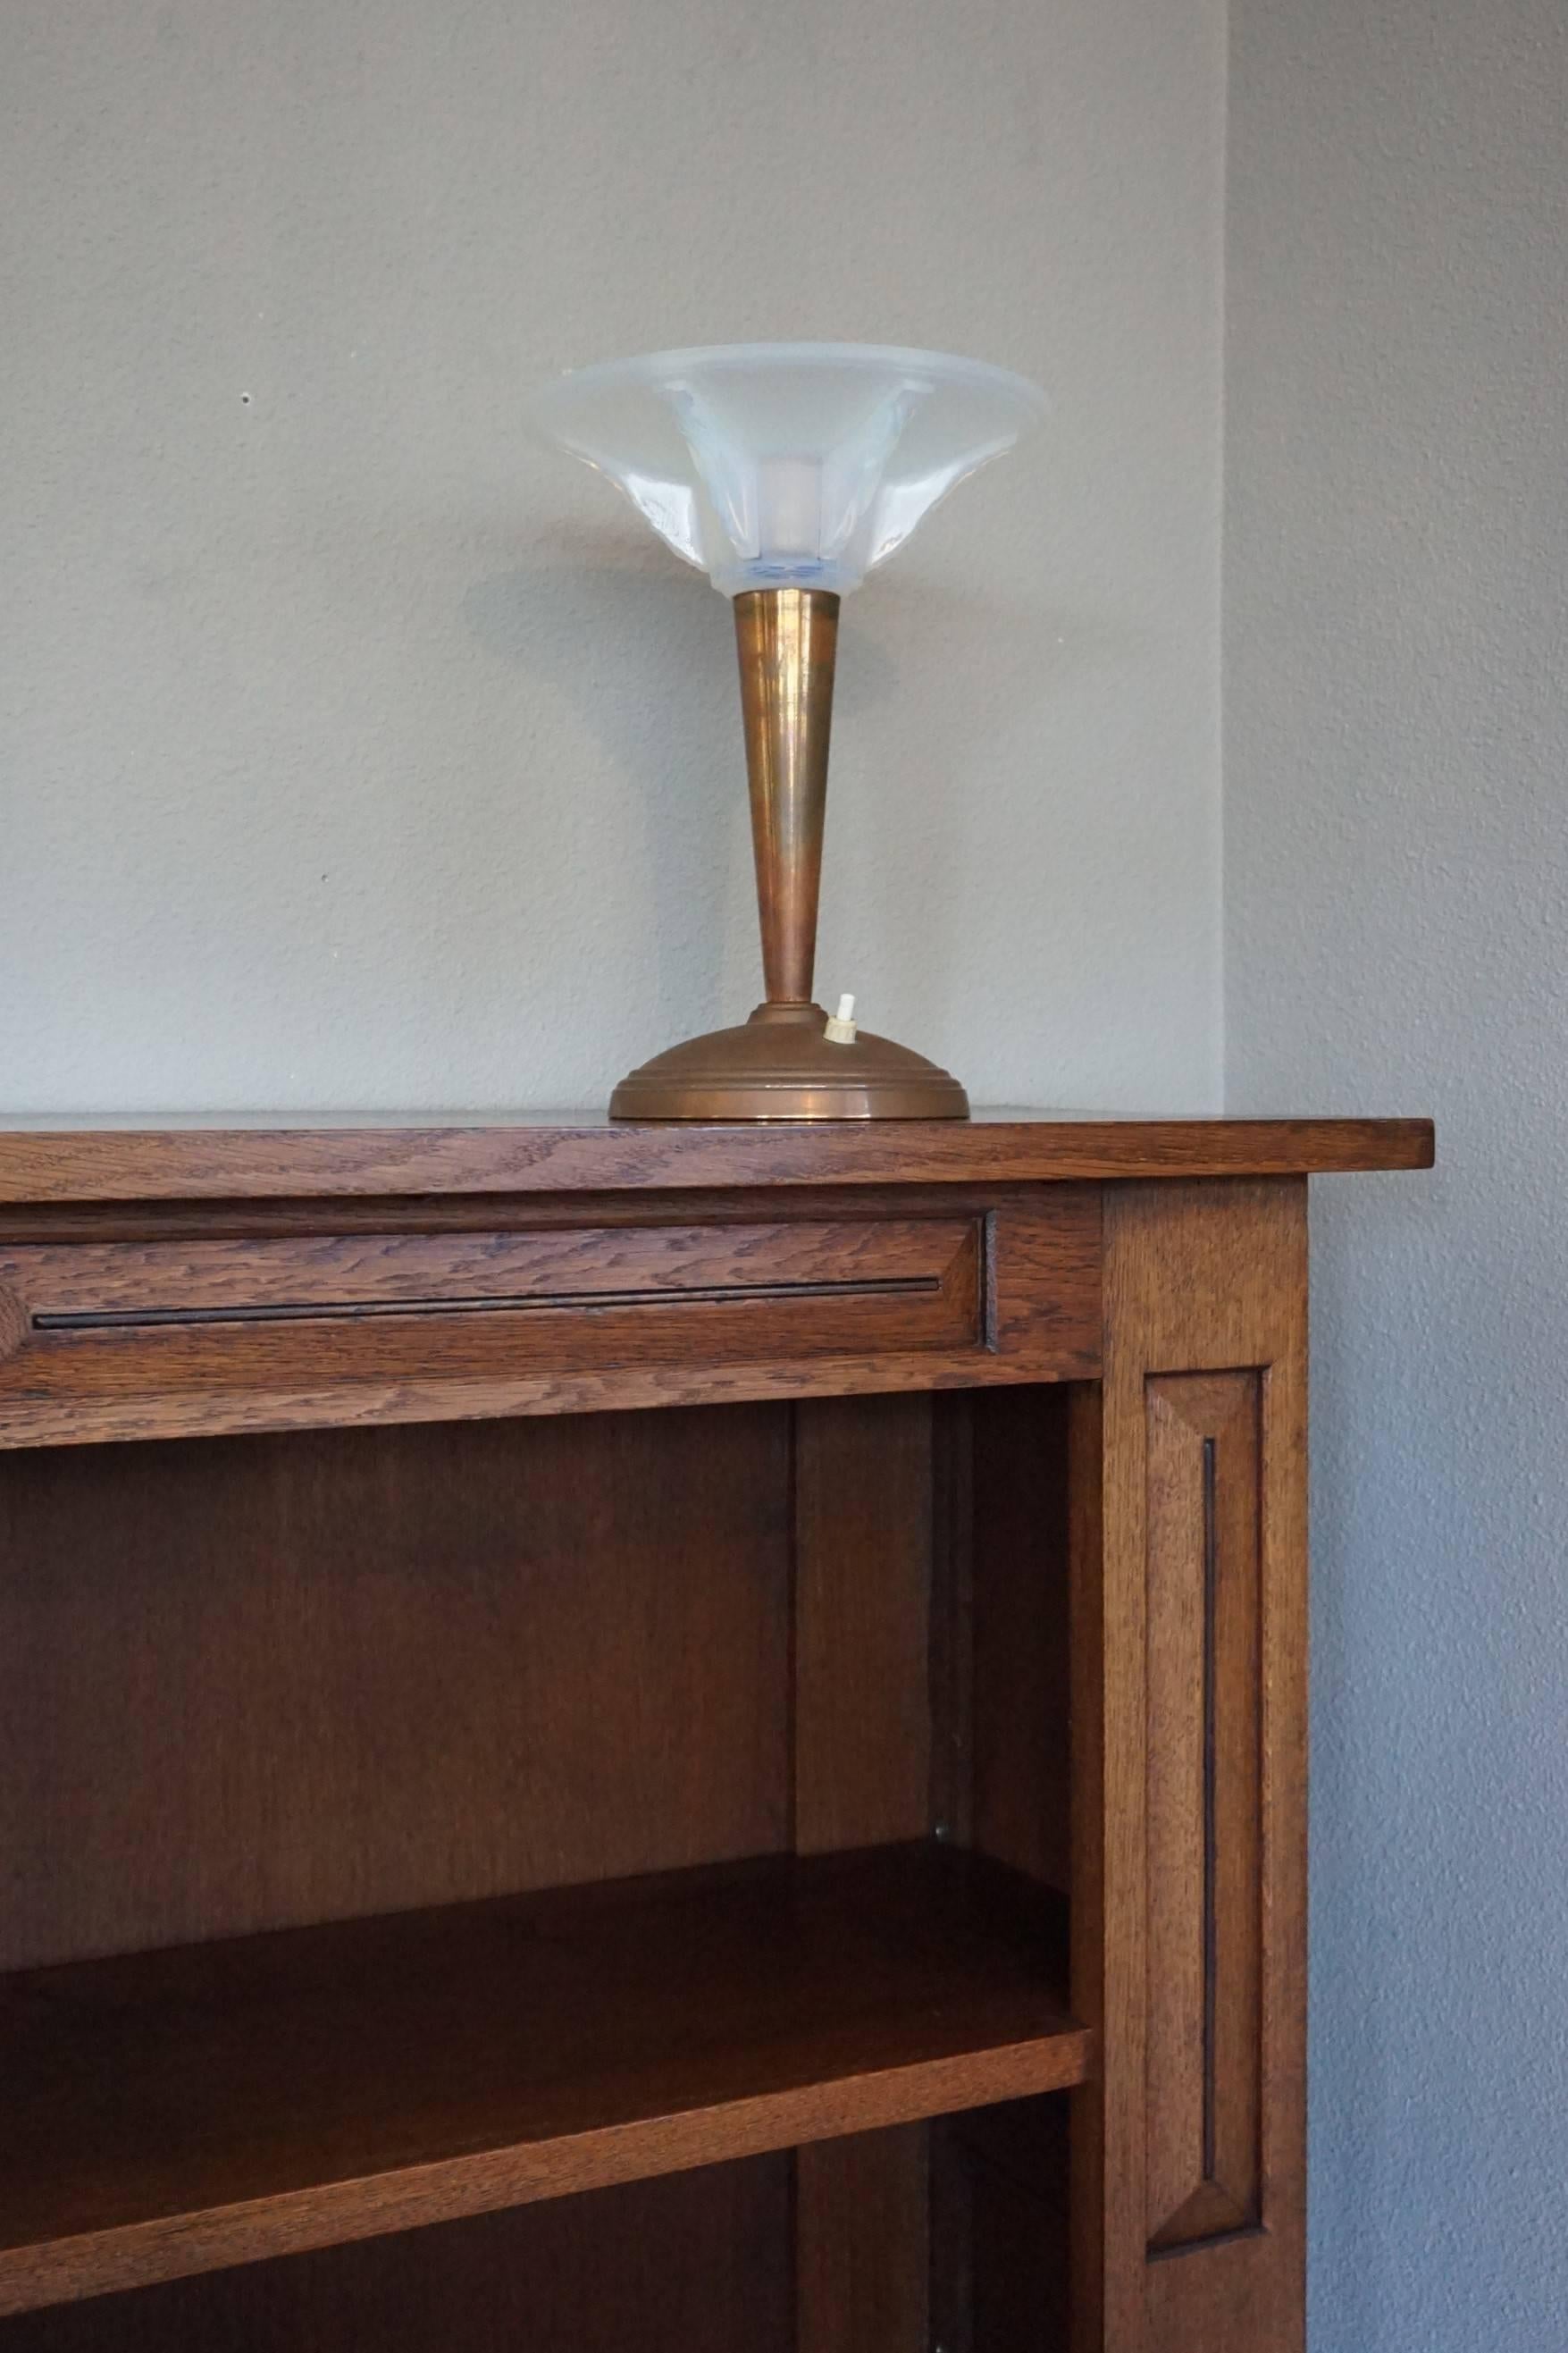 Art Deco Table or Desk Lamp with a Lalique Style Iridescent Blue Glass Shade 1